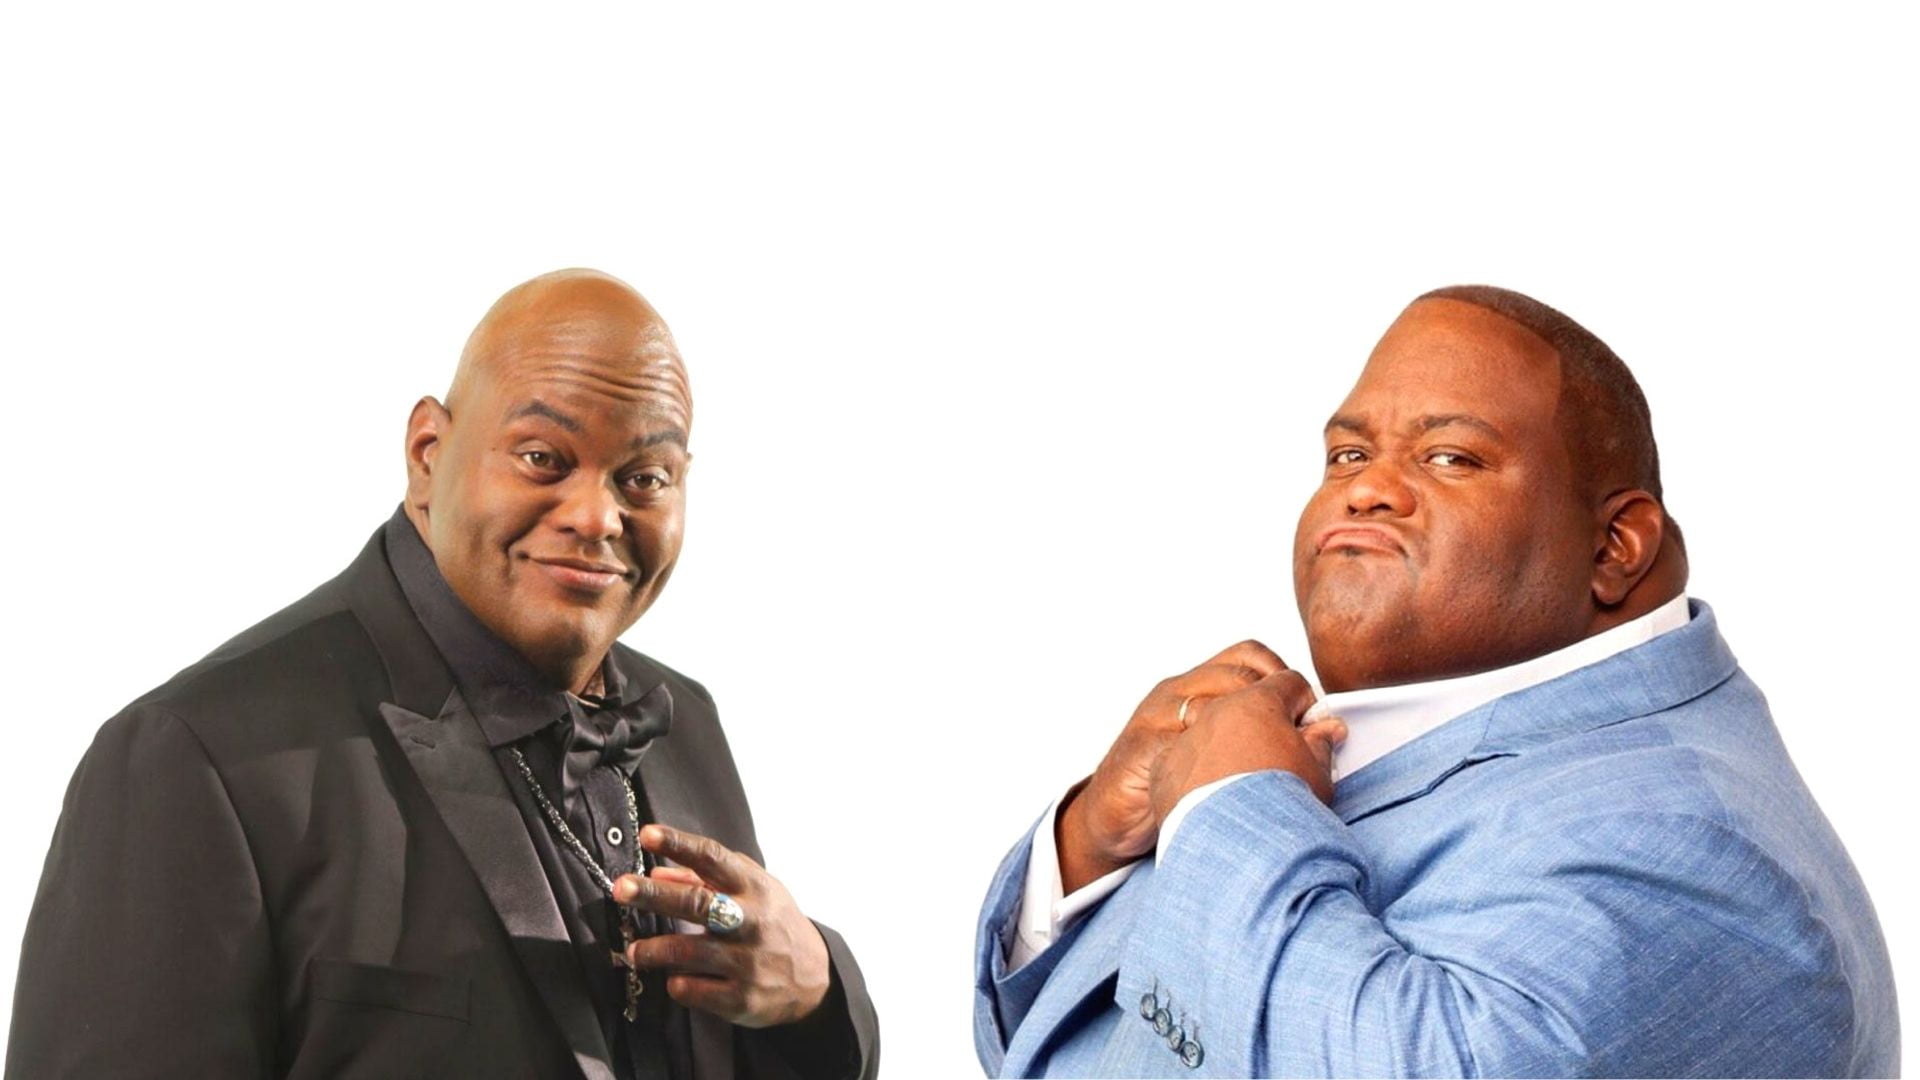 Known As Huell From Breaking Bad, Lavell Crawford’s Weight Loss Experience